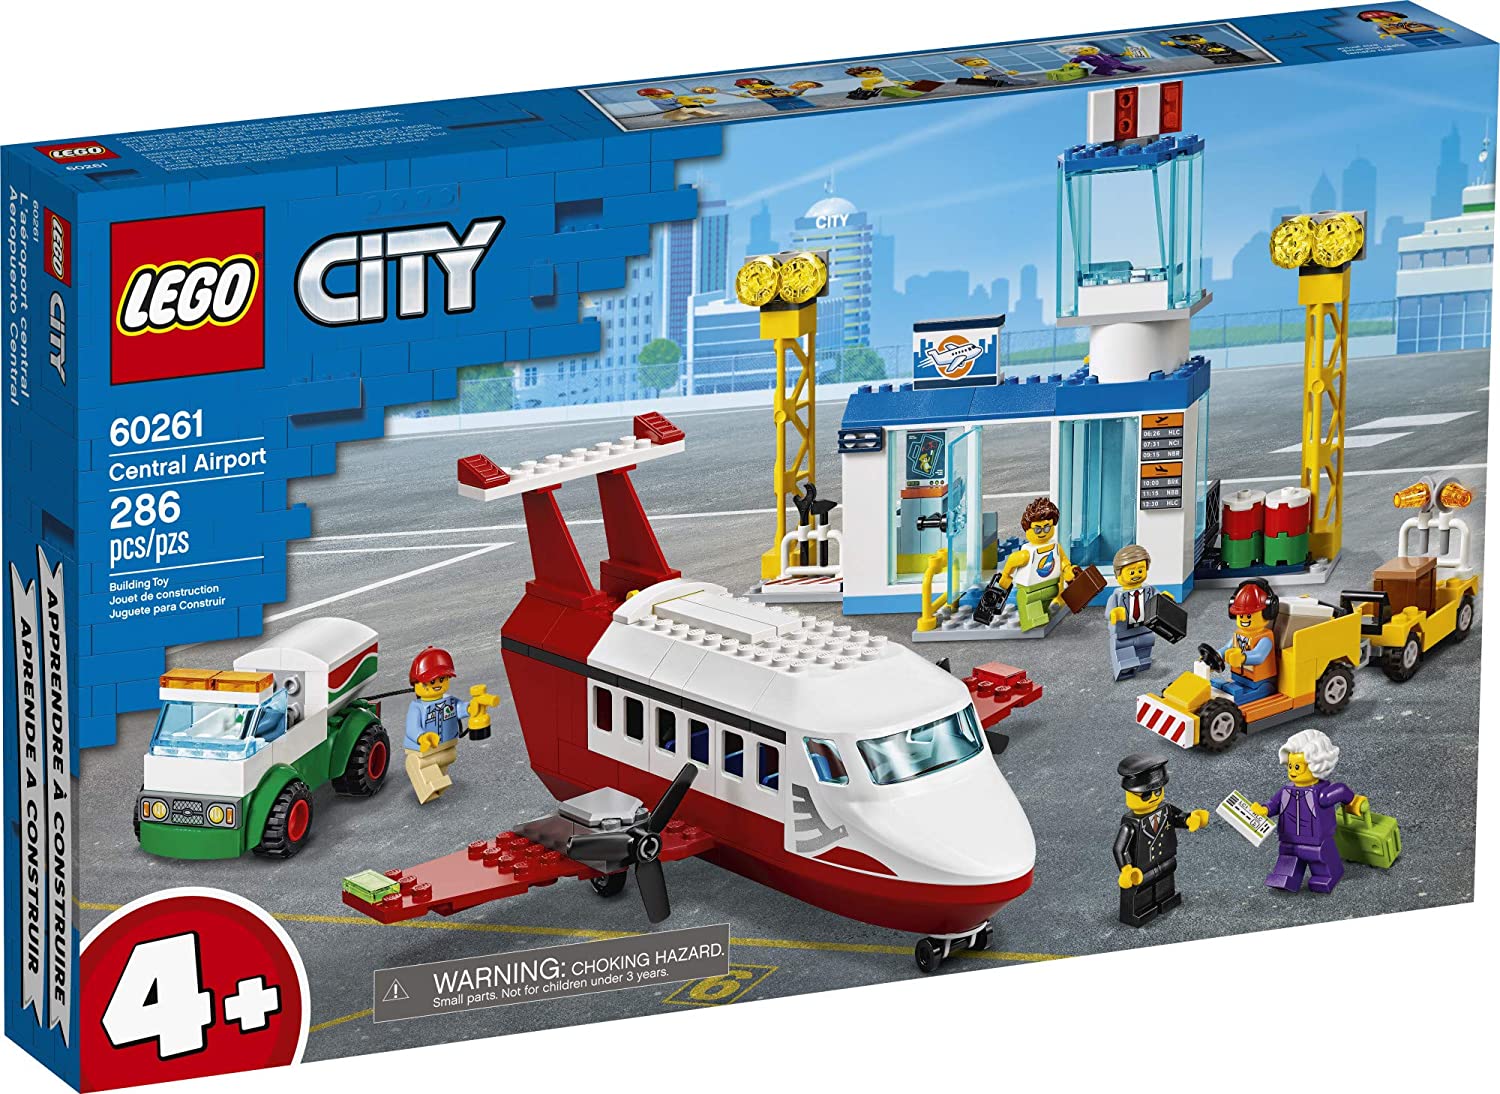 Lego City Central Airport